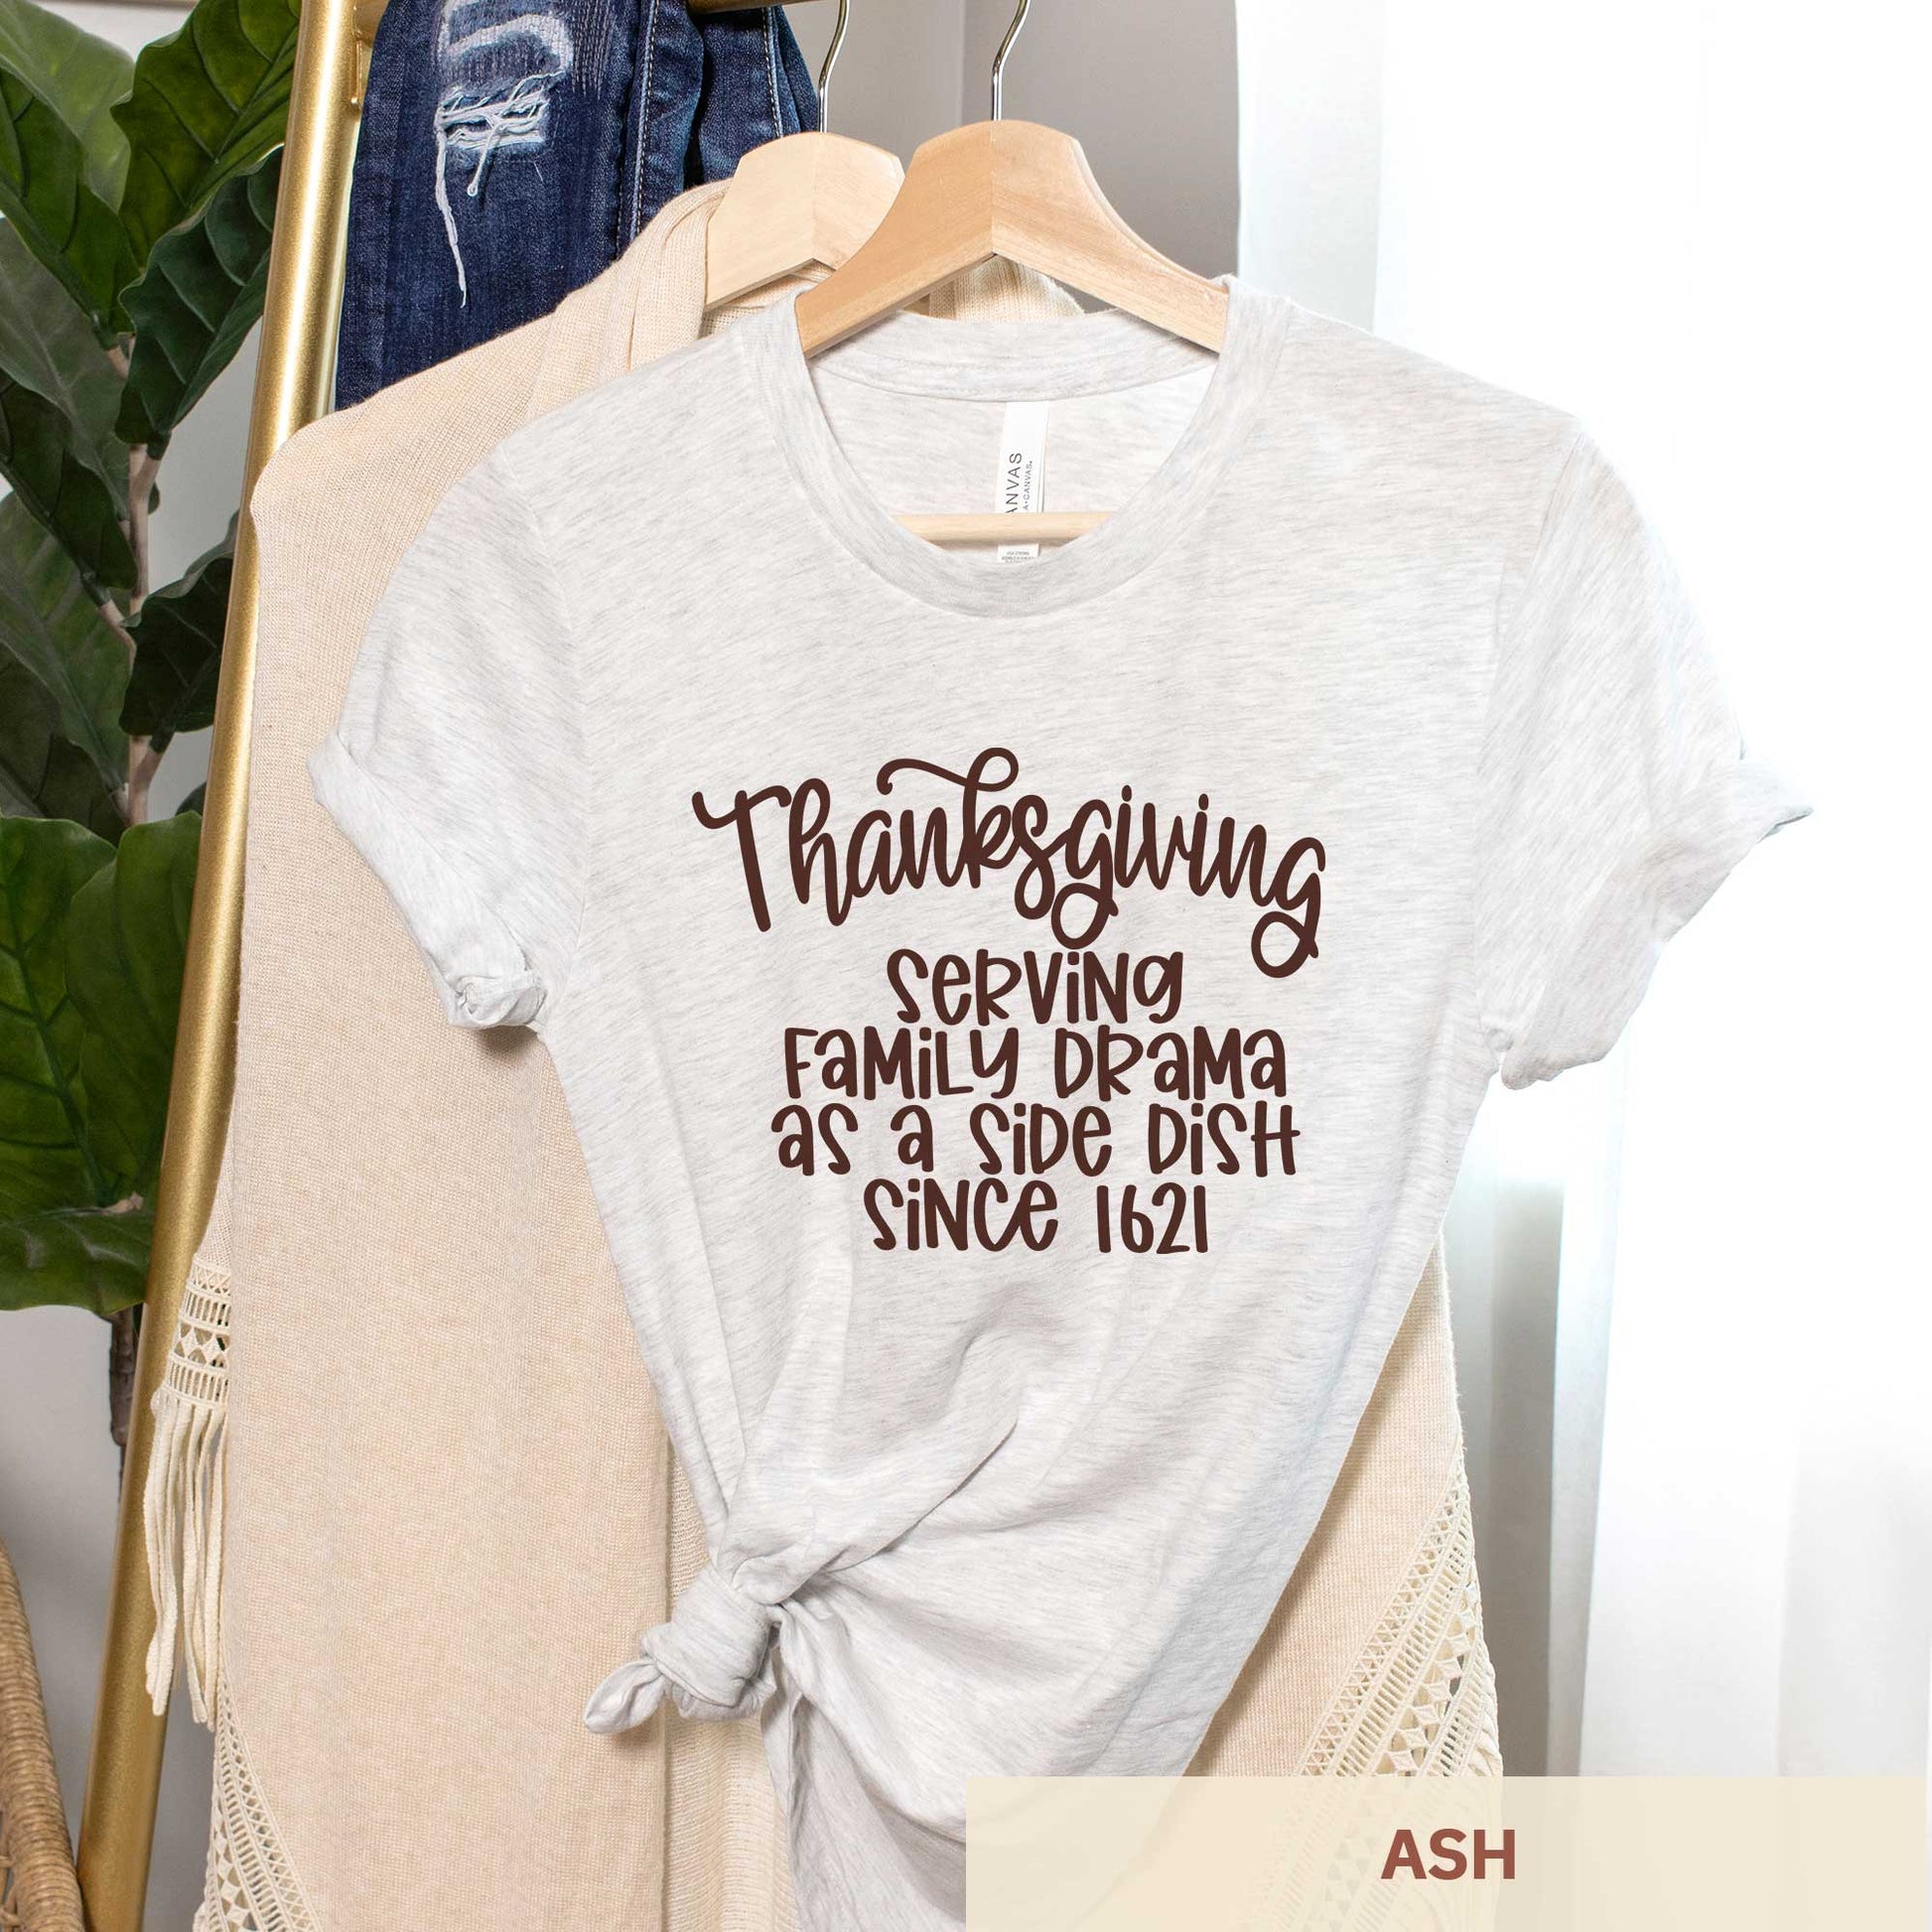 A hanging ash Bella Canvas t-shirt featuring the words thanksgiving serving family as a side dish since 1621.